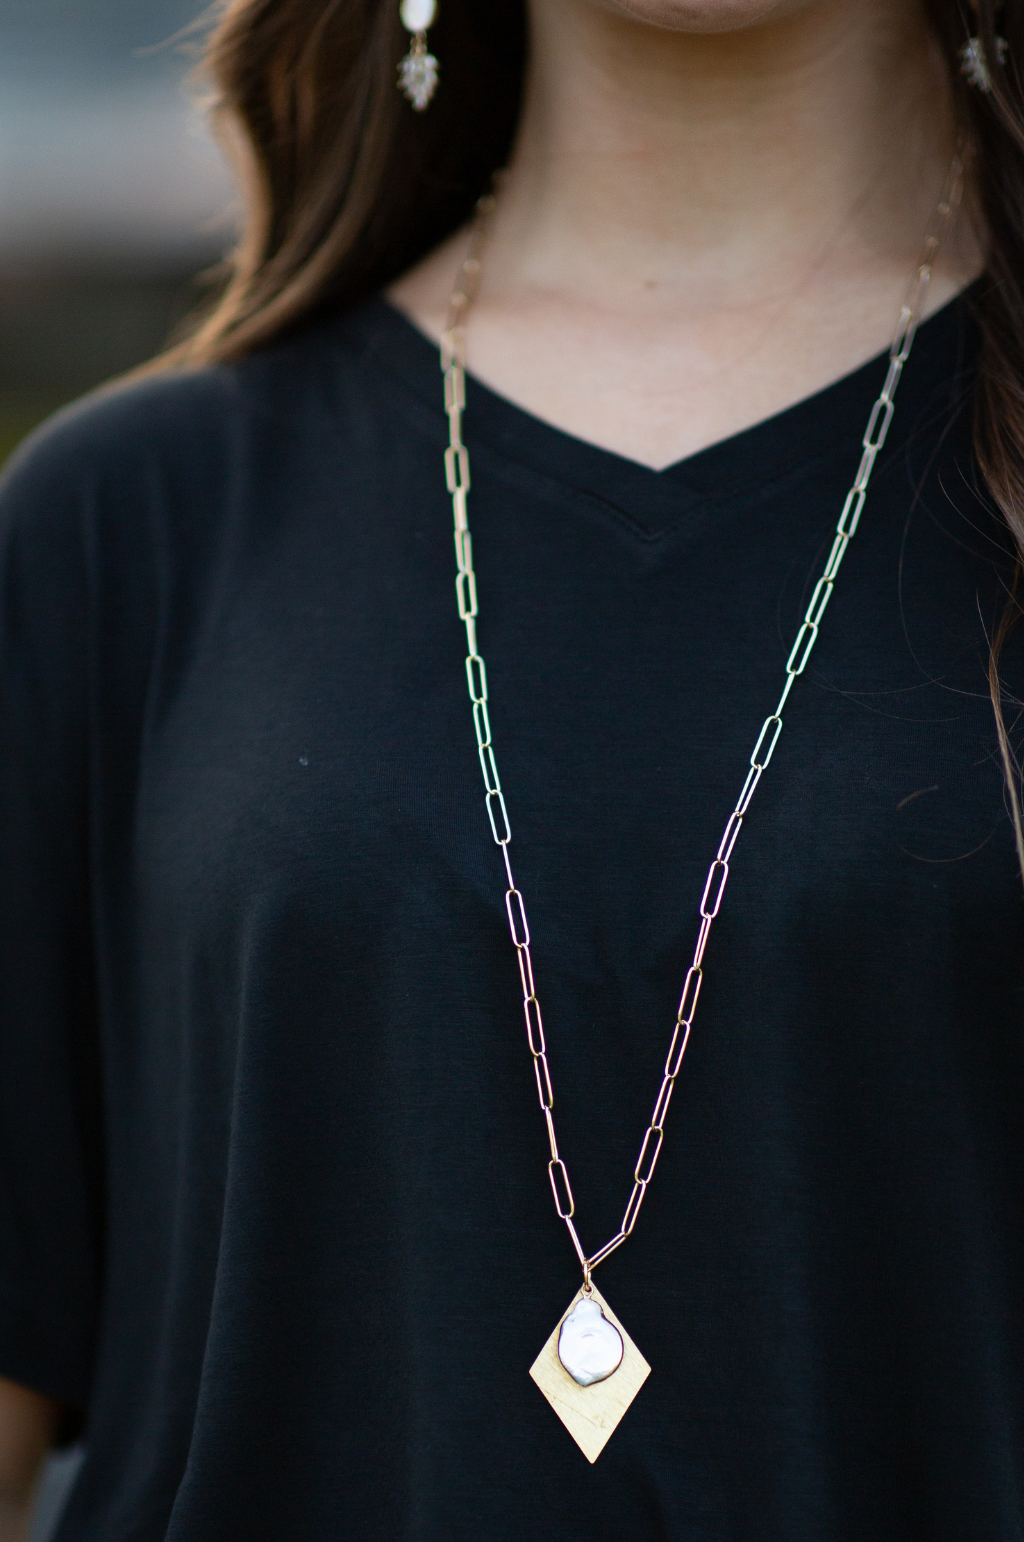 The Edline Necklace by Annie Claire Designs